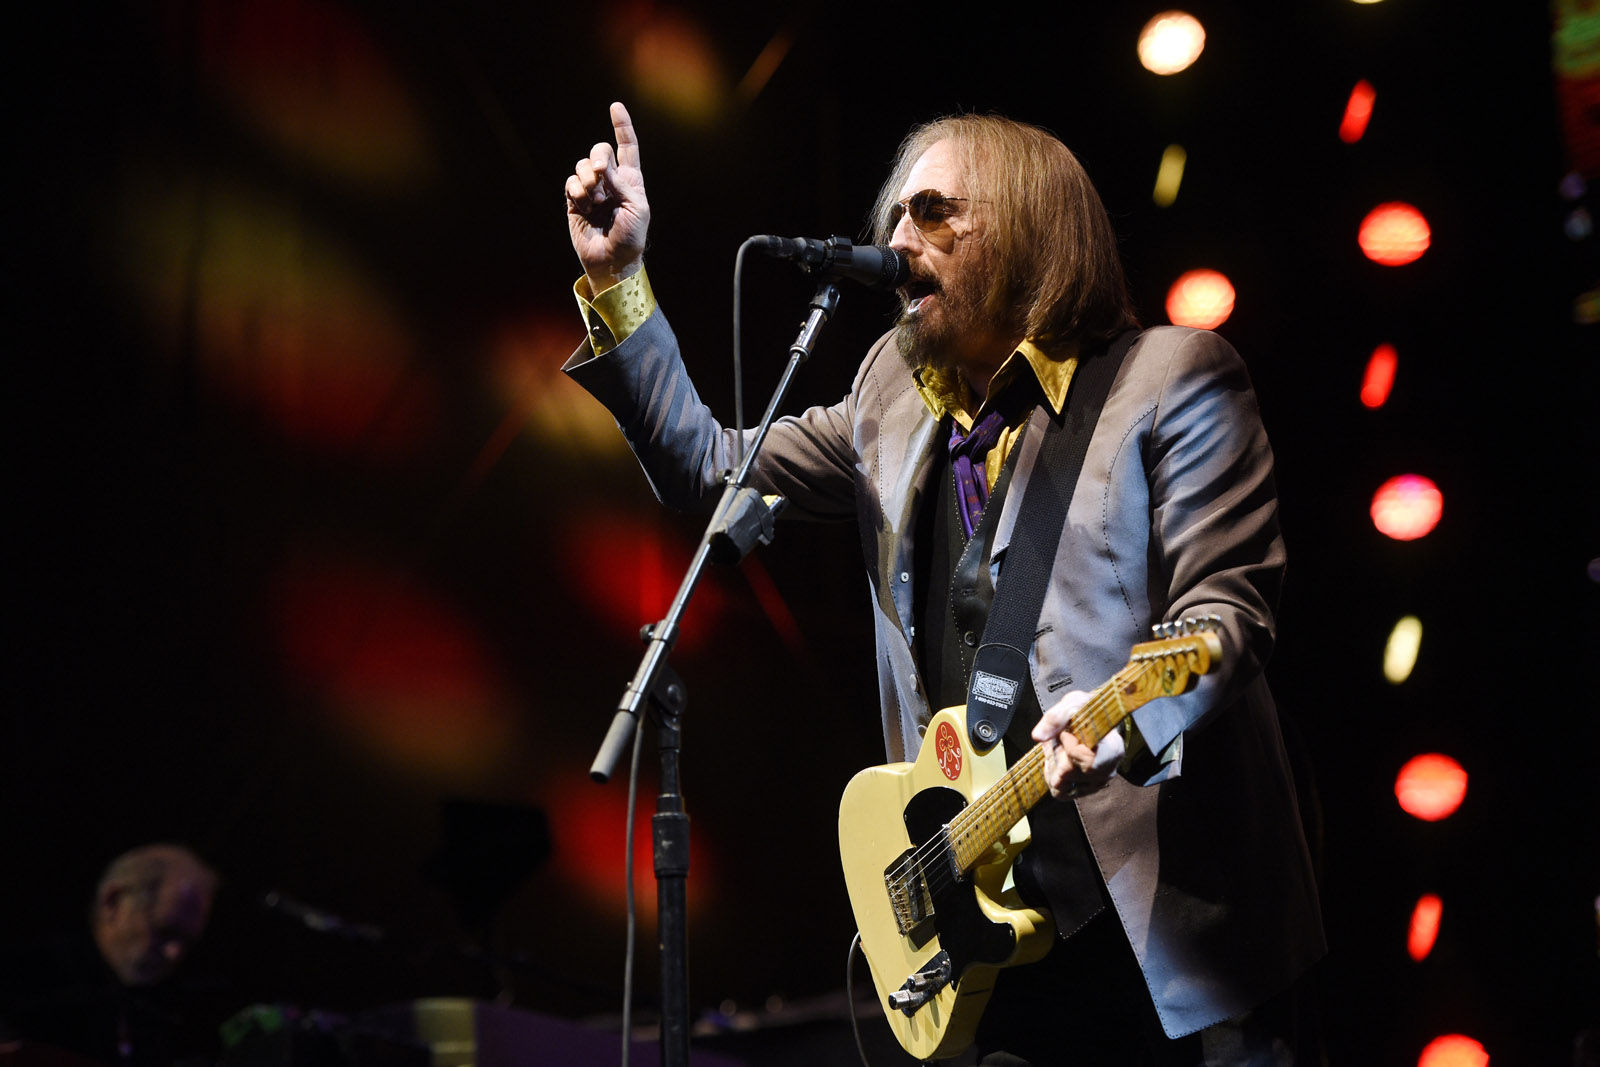 Tom Petty performs with The Heartbreakers during their headlining set on Day 1 of the inaugural 2017 Arroyo Seco Music Festival on Saturday, June 24, 2017, in Pasadena, Calif. (Photo by Chris Pizzello/Invision/AP)